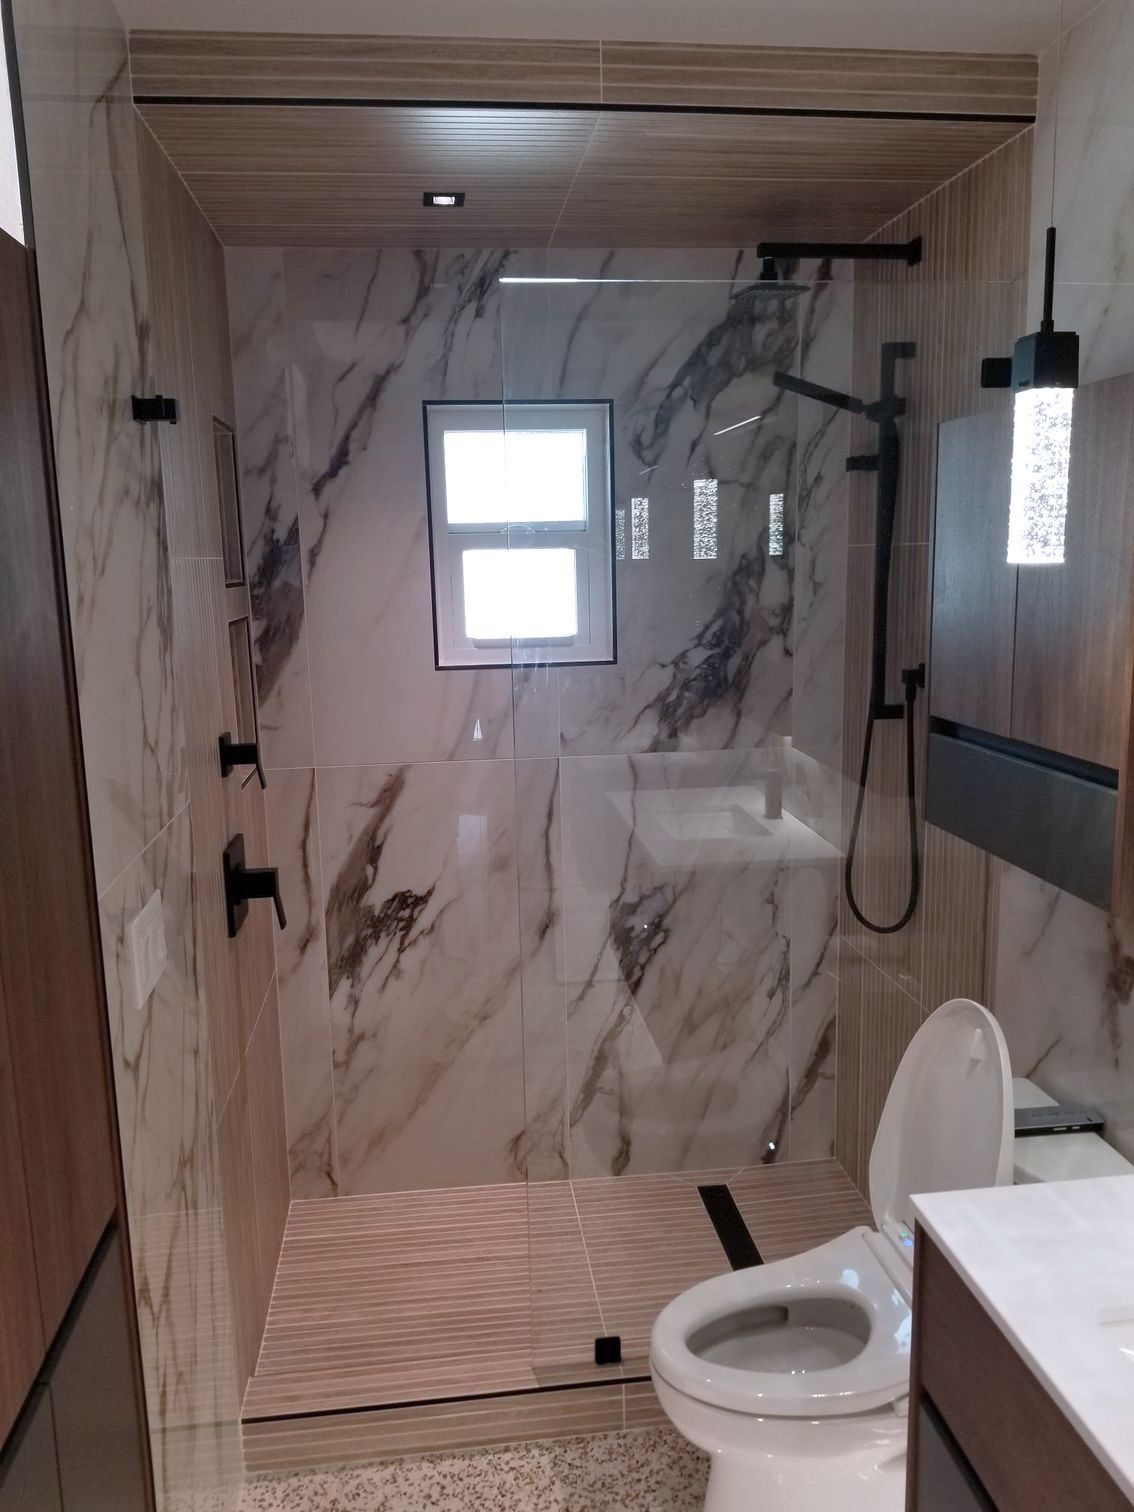 A bathroom with a toilet, shower, and marble walls